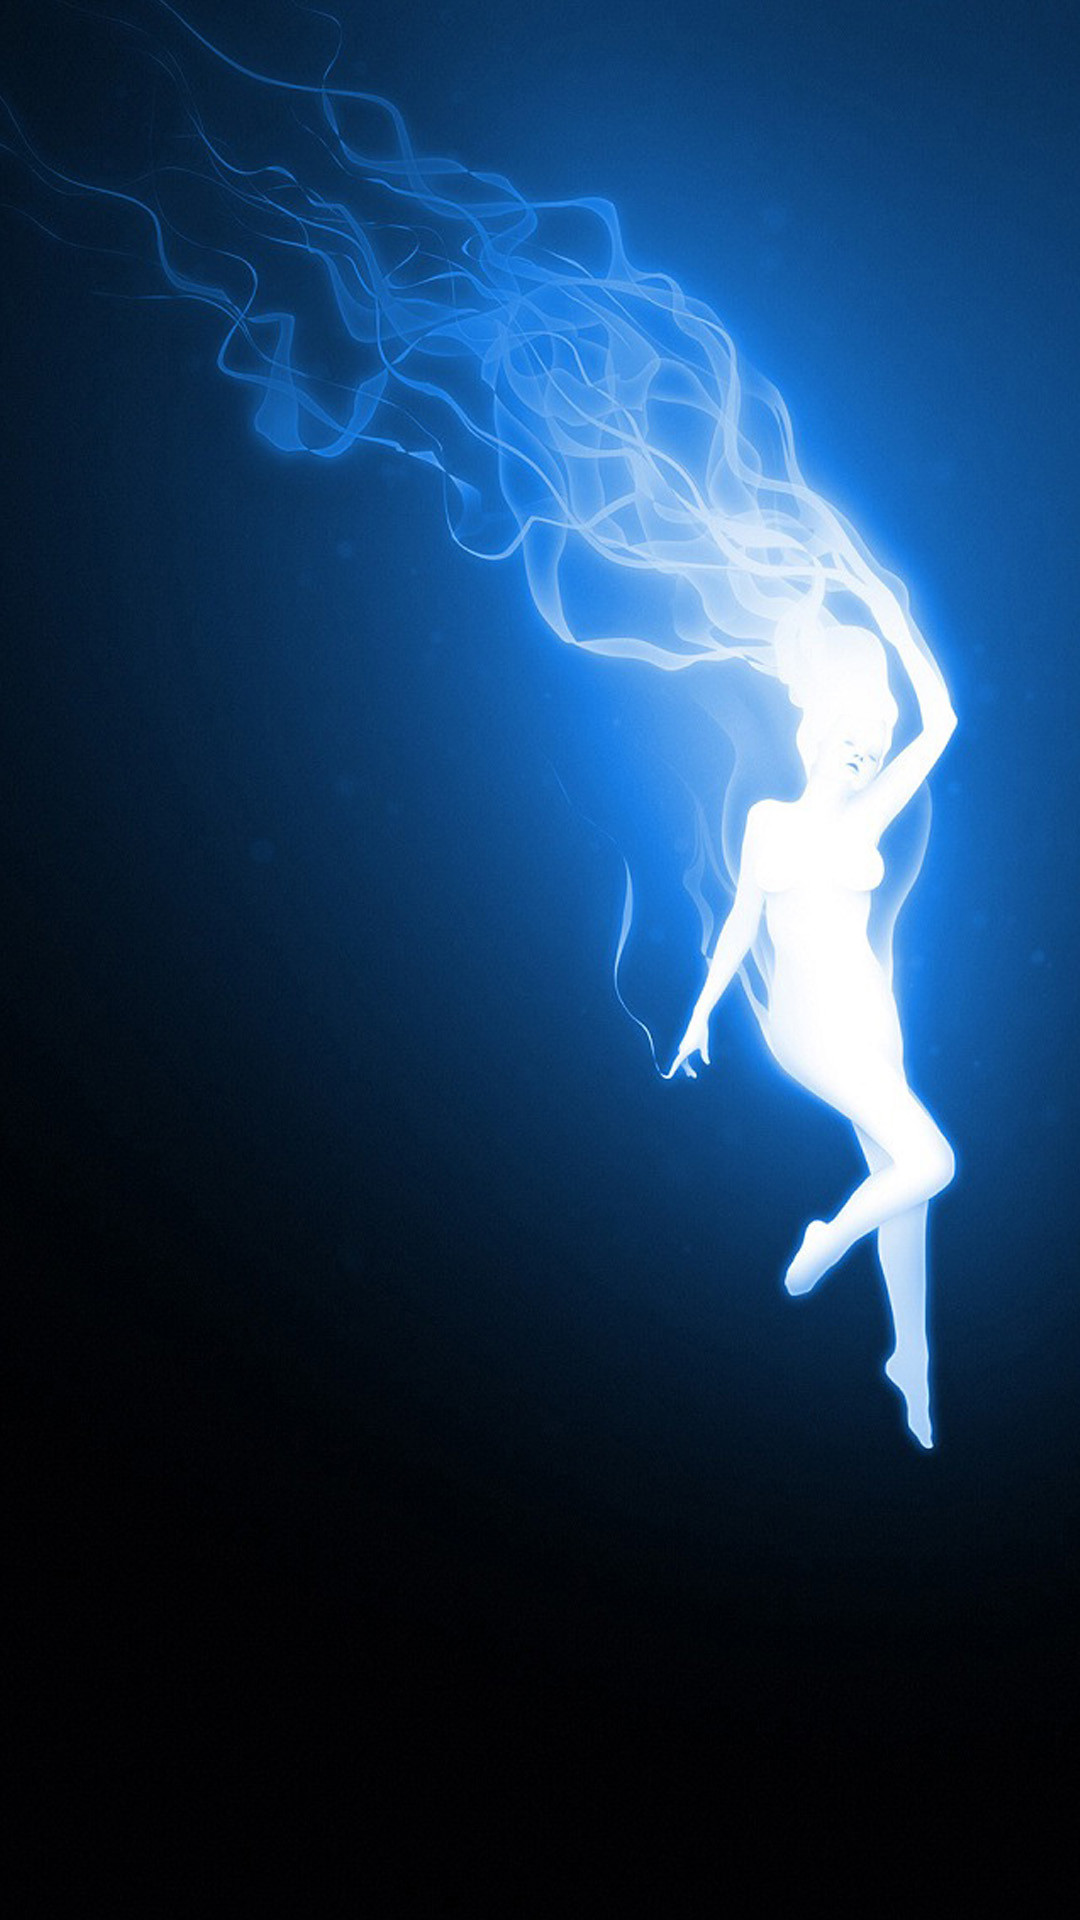 1080x1920 Blue fire woman Note 3 Wallpapers